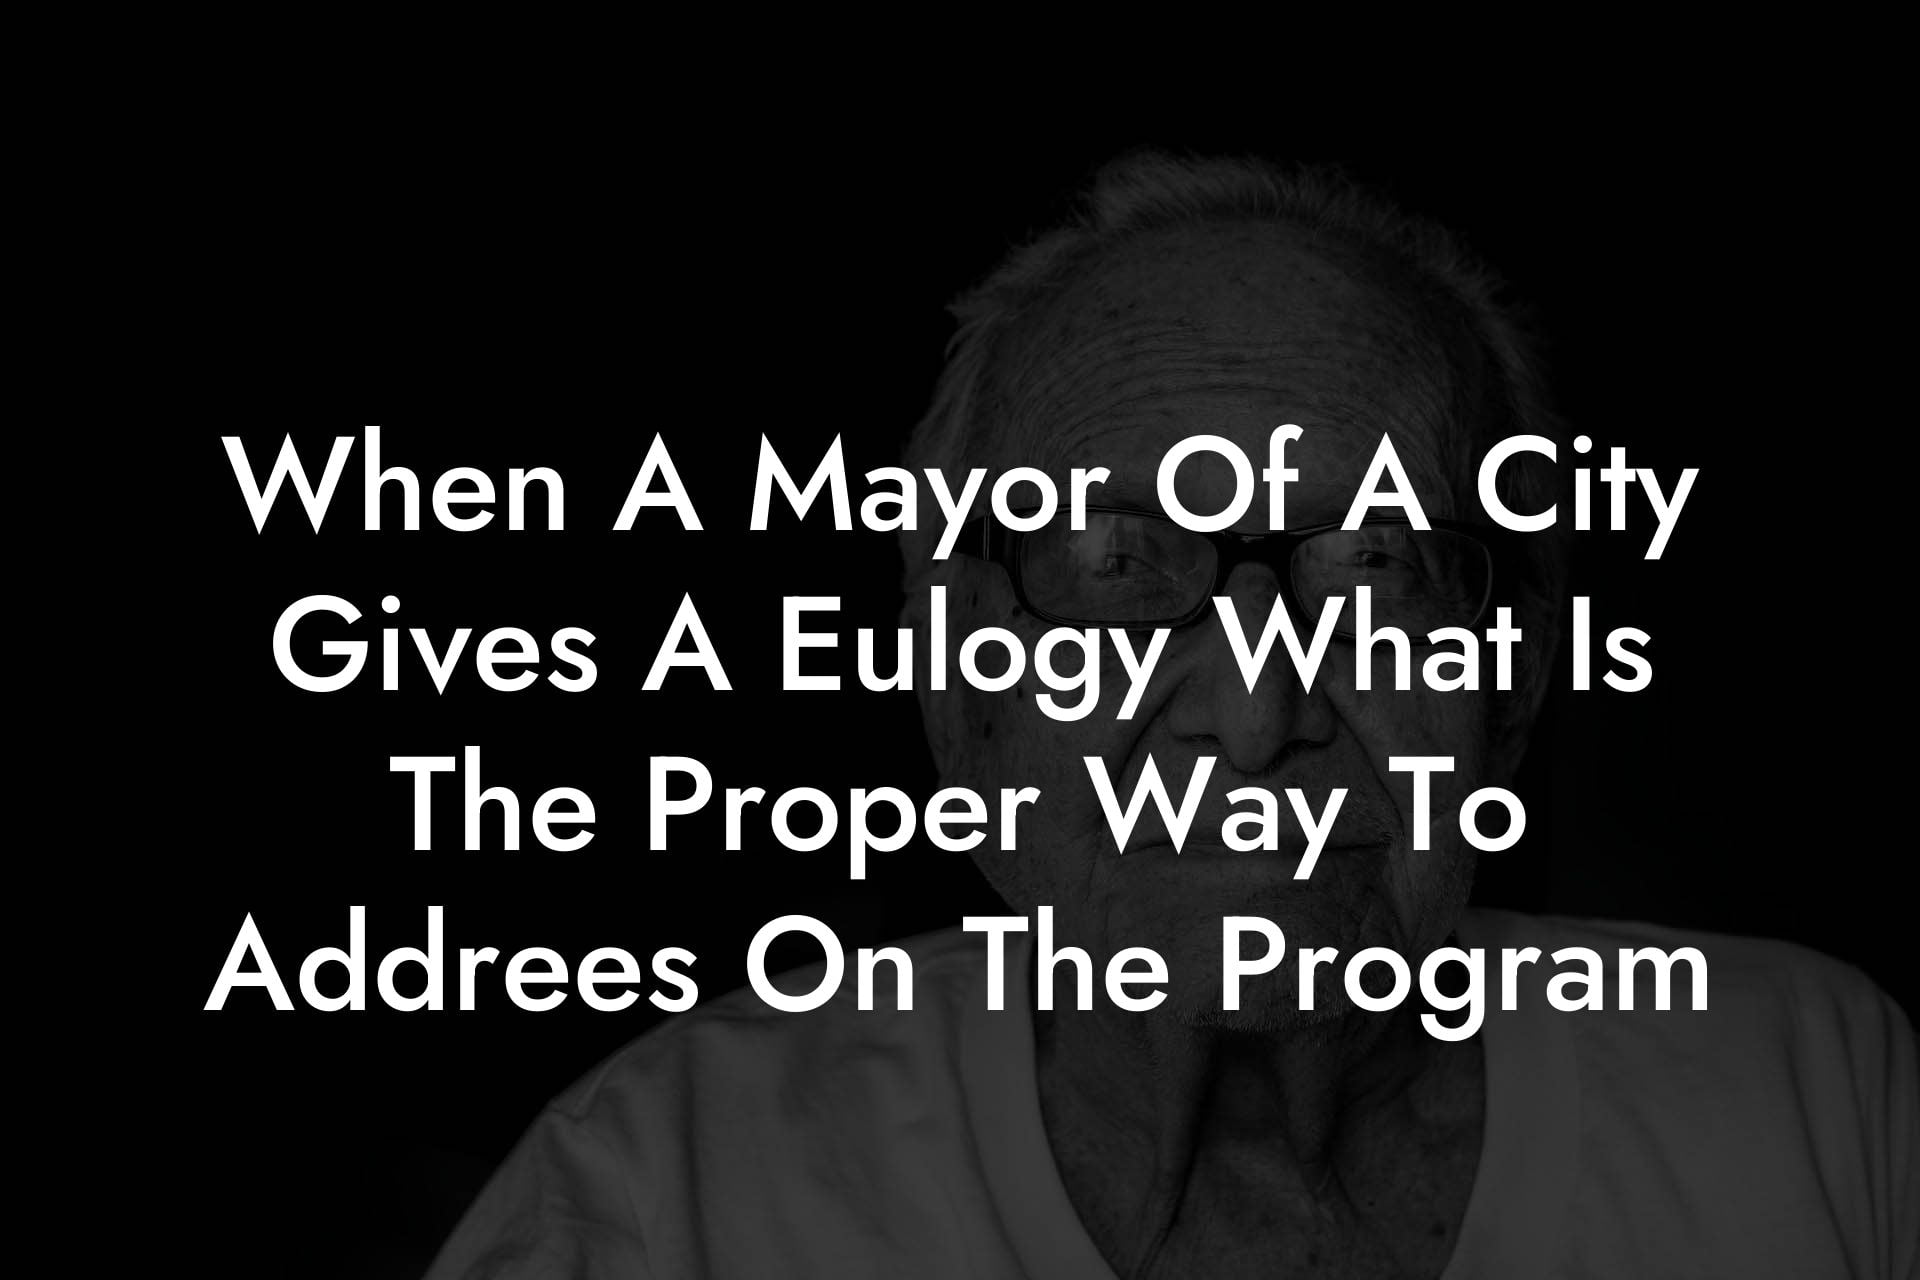 When A Mayor Of A City Gives A Eulogy What Is The Proper Way To Addrees On The Program